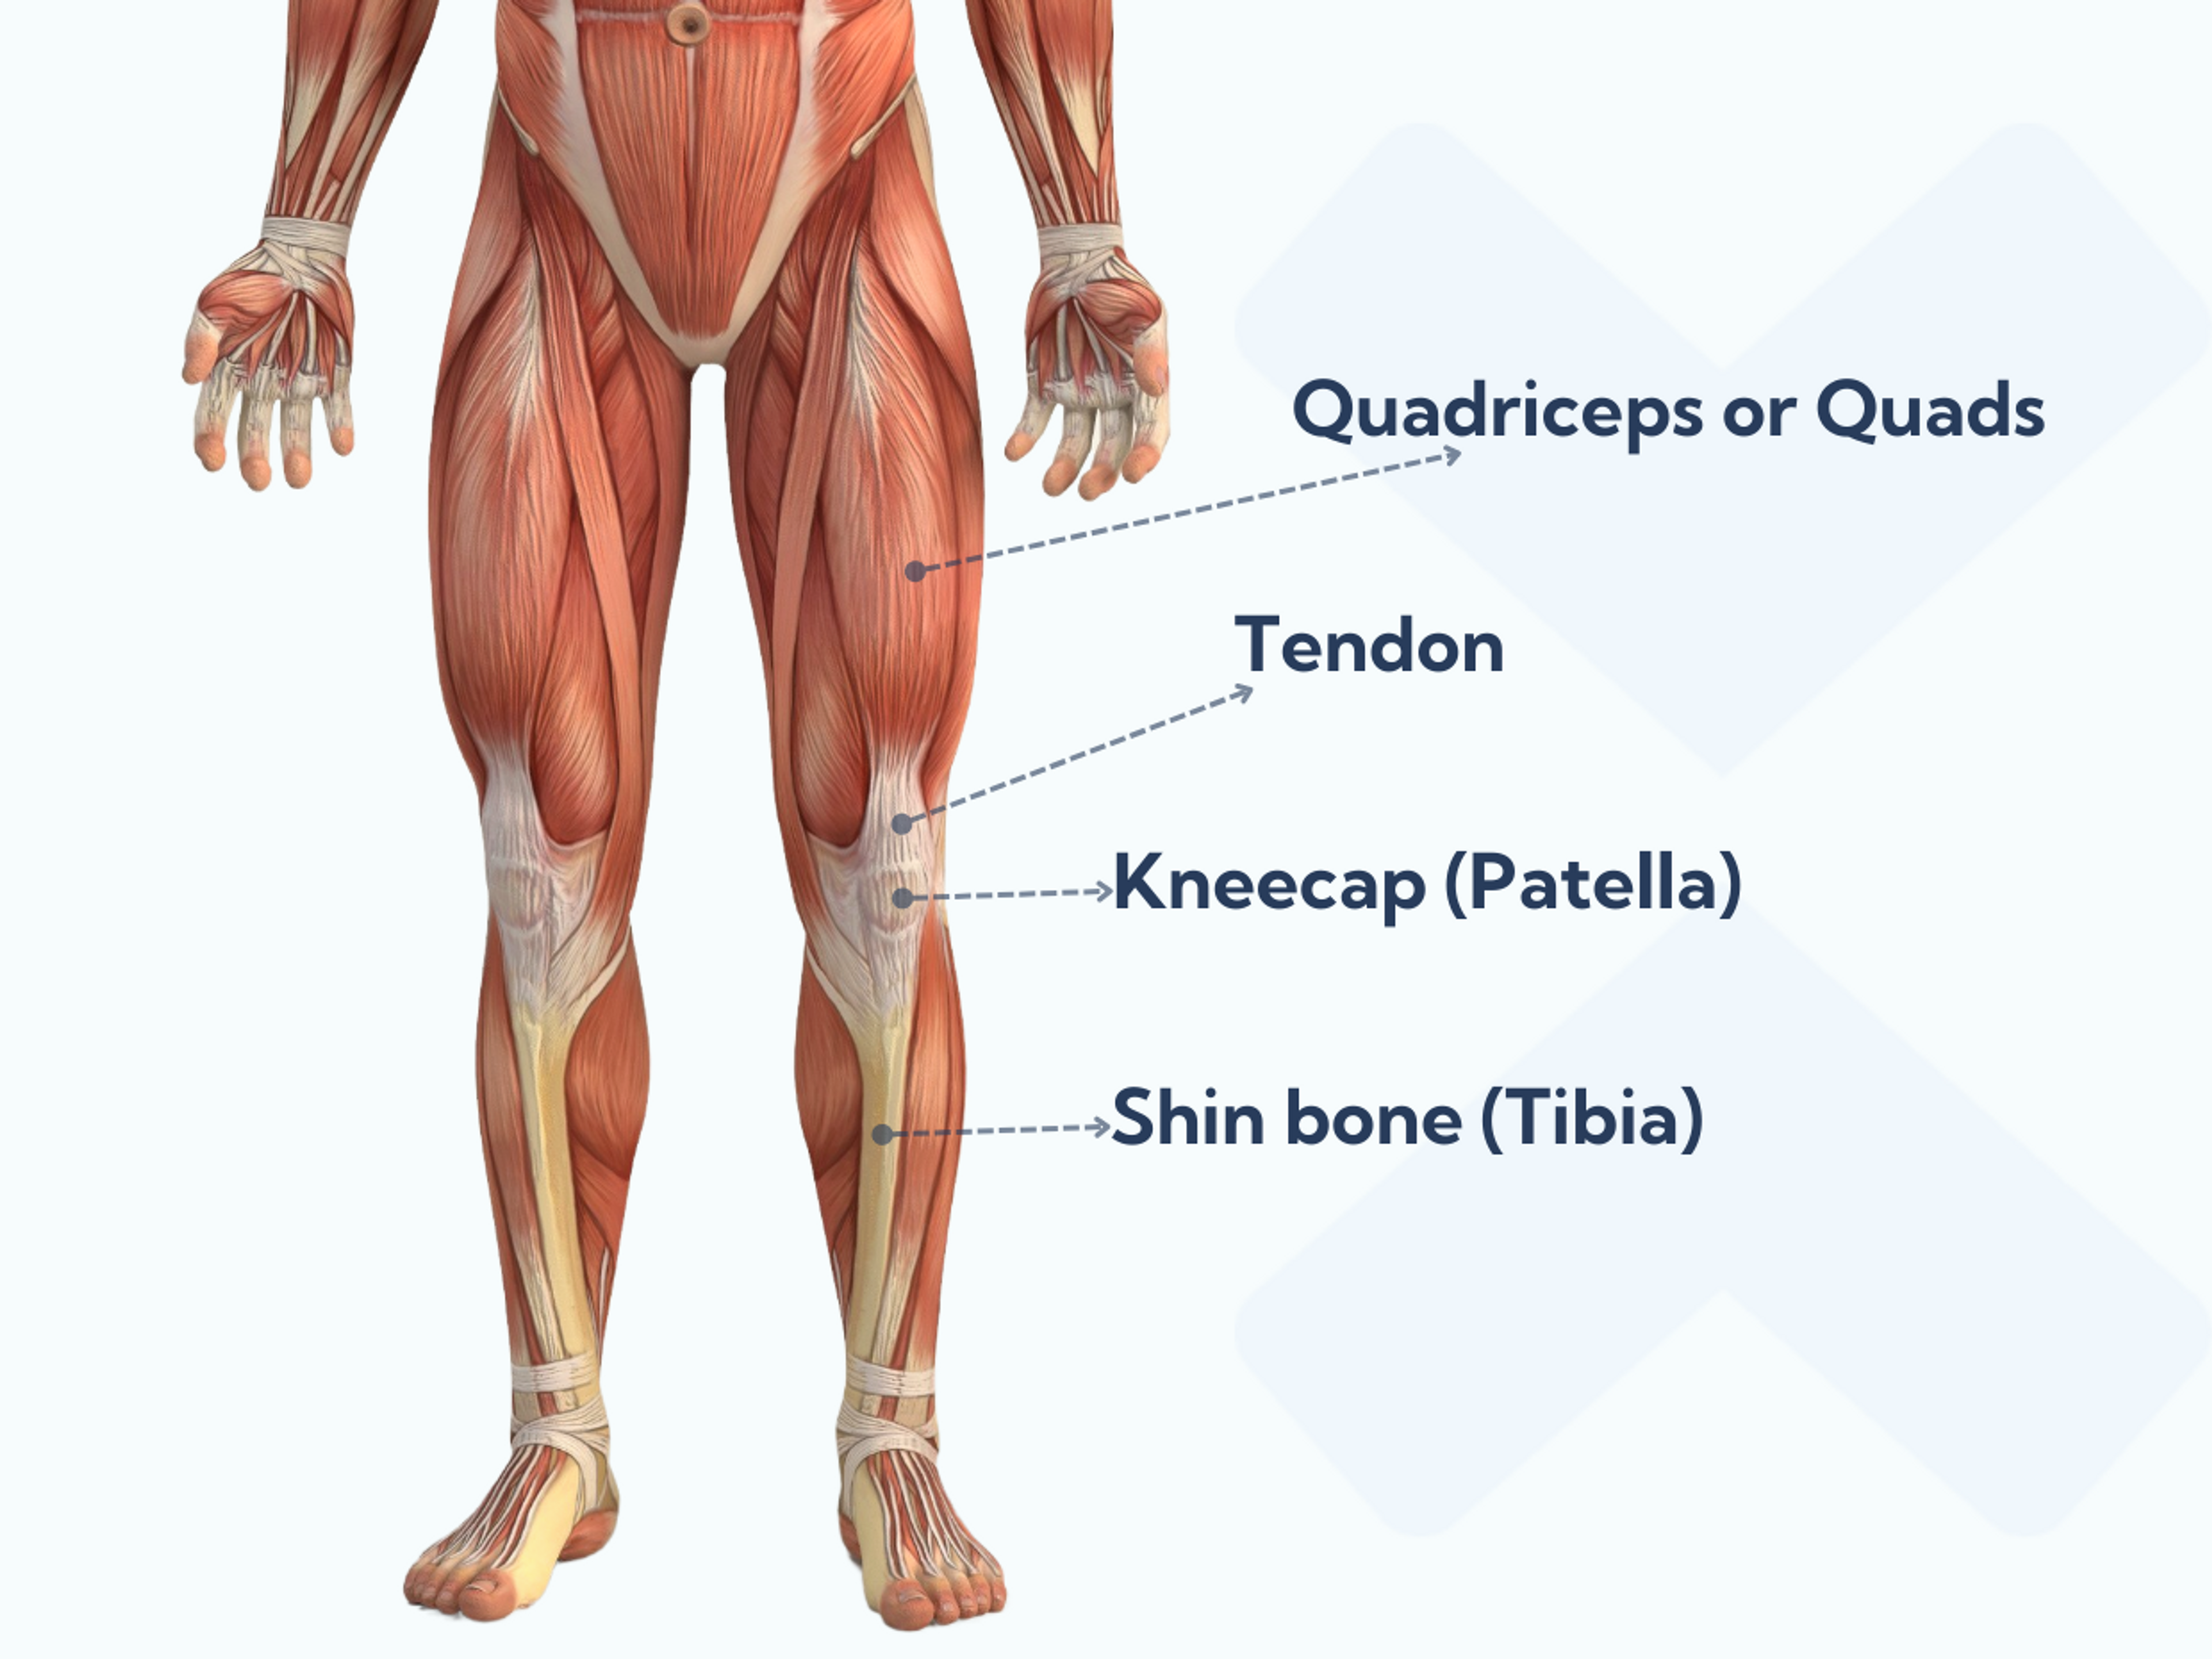 The kneecap sits inside the quadriceps tendon and moves in a shallow groove.